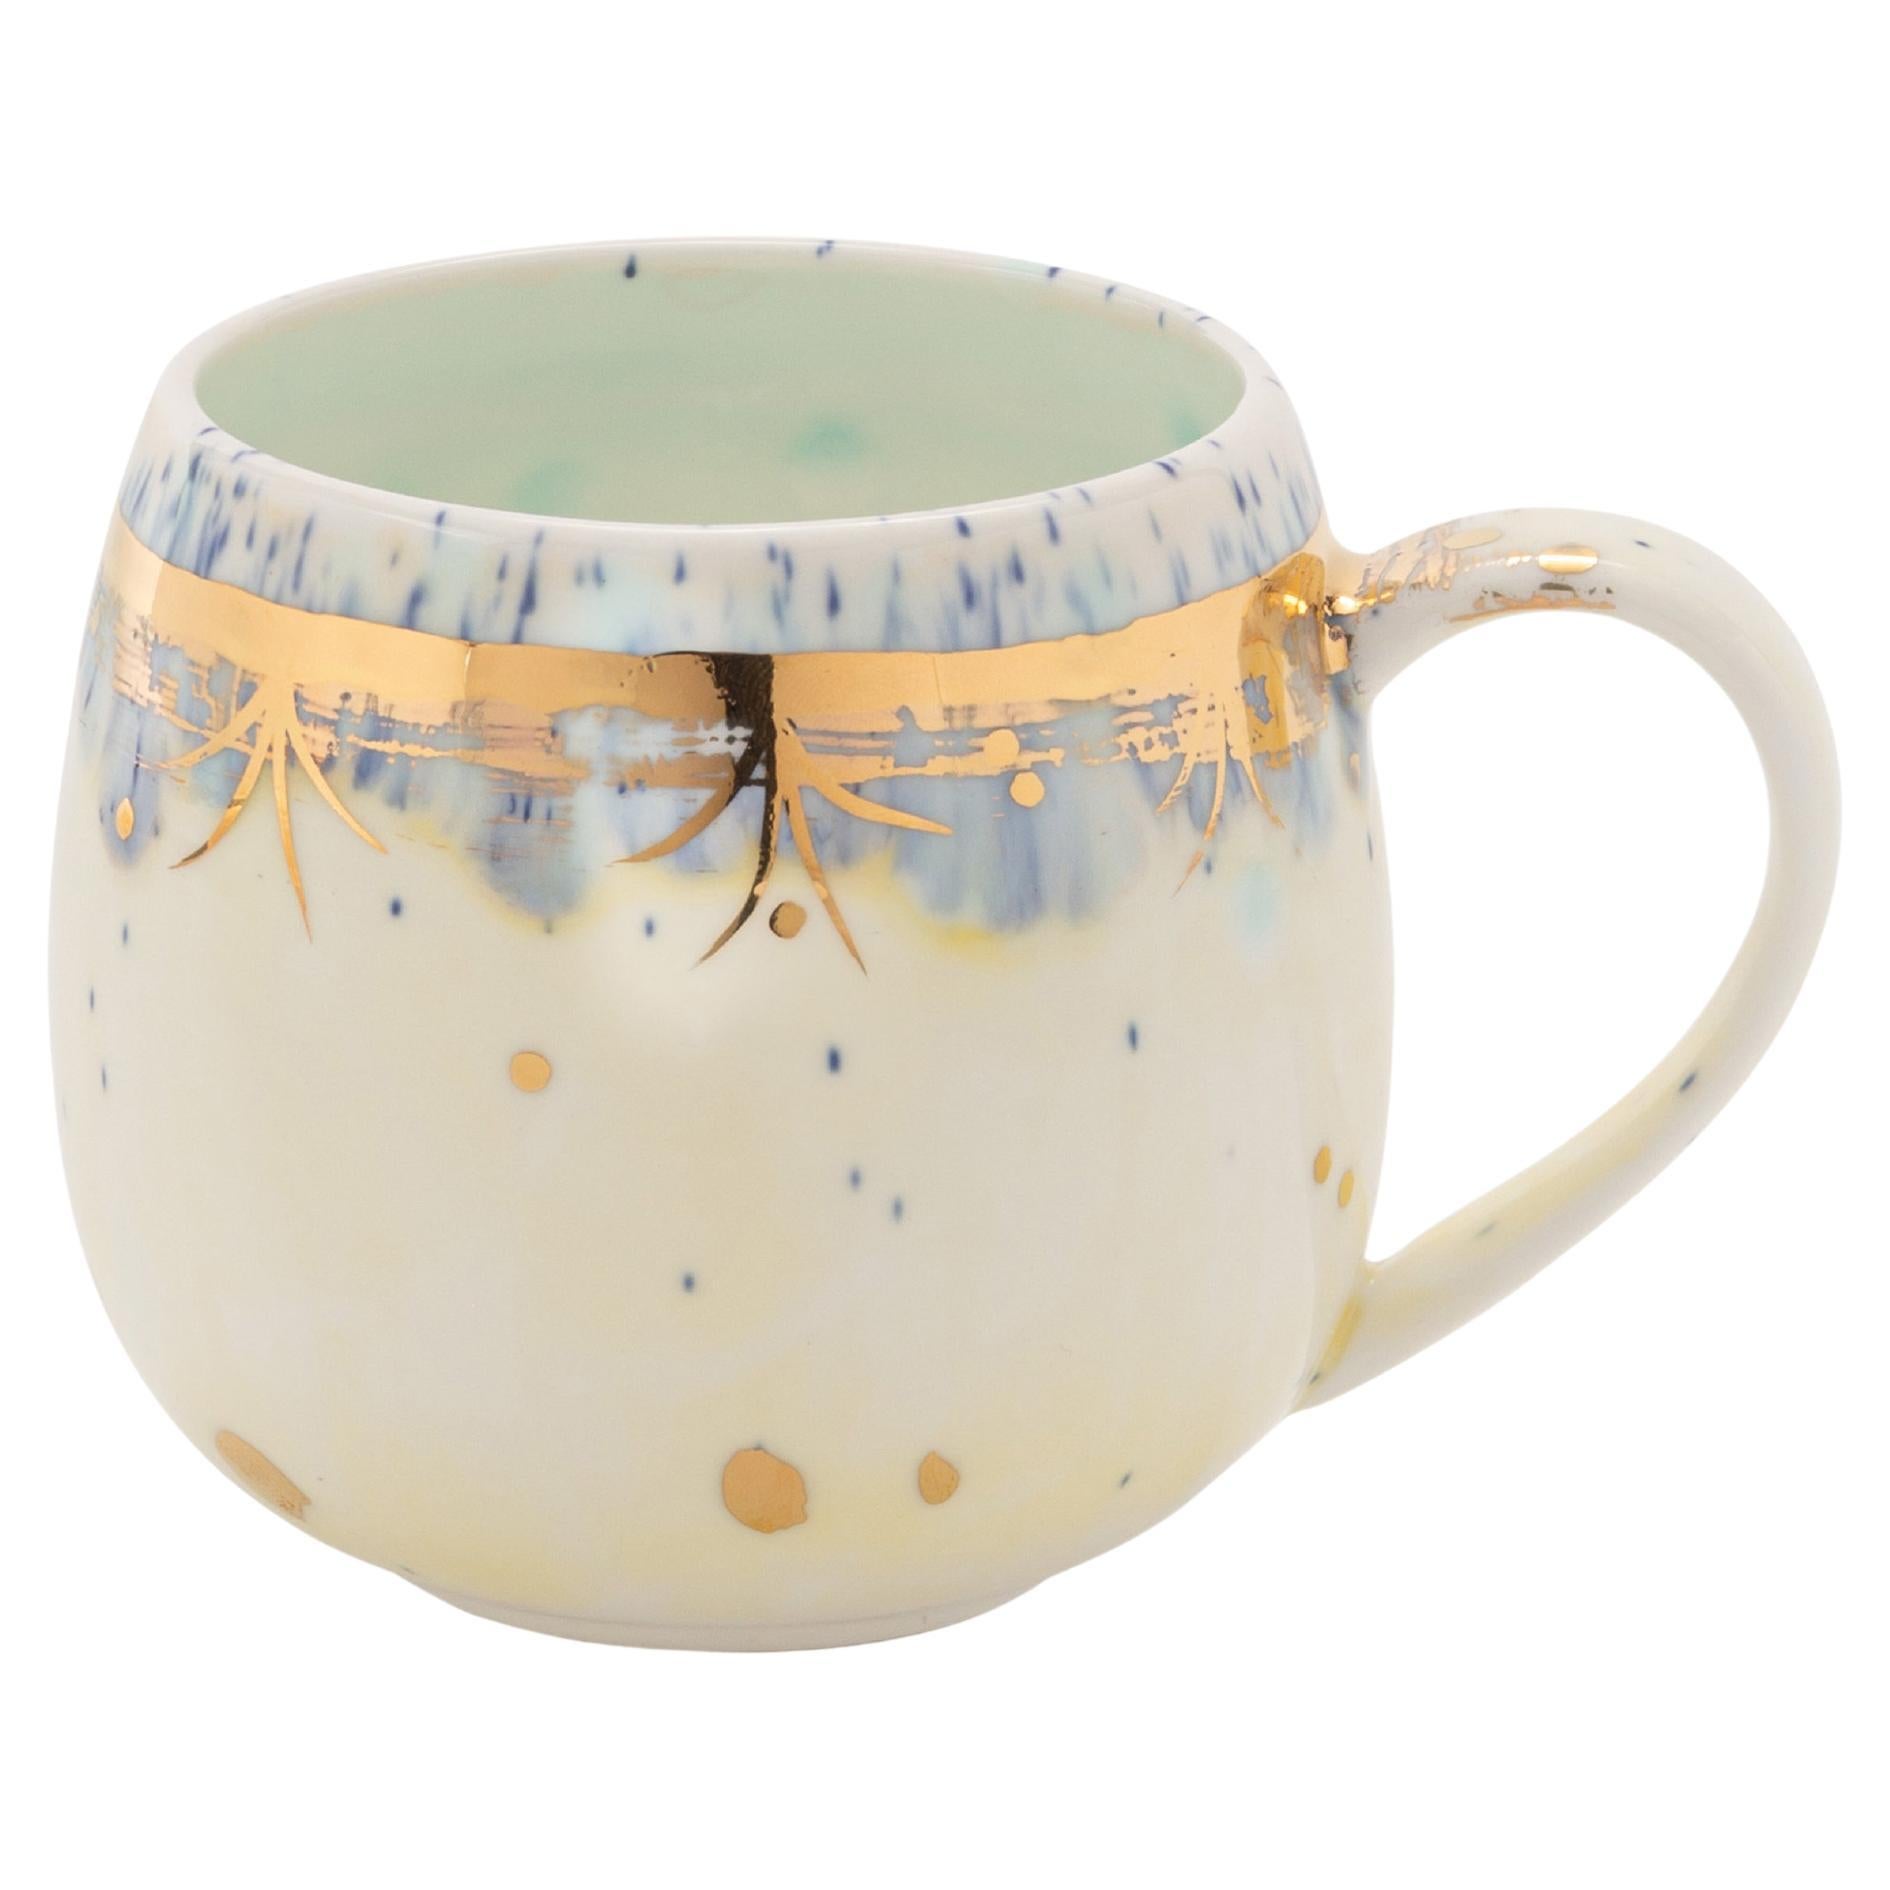 Contemporary Set of 2 Chubby Mugs Hand Painted Porcelain Yellow Gold For Sale